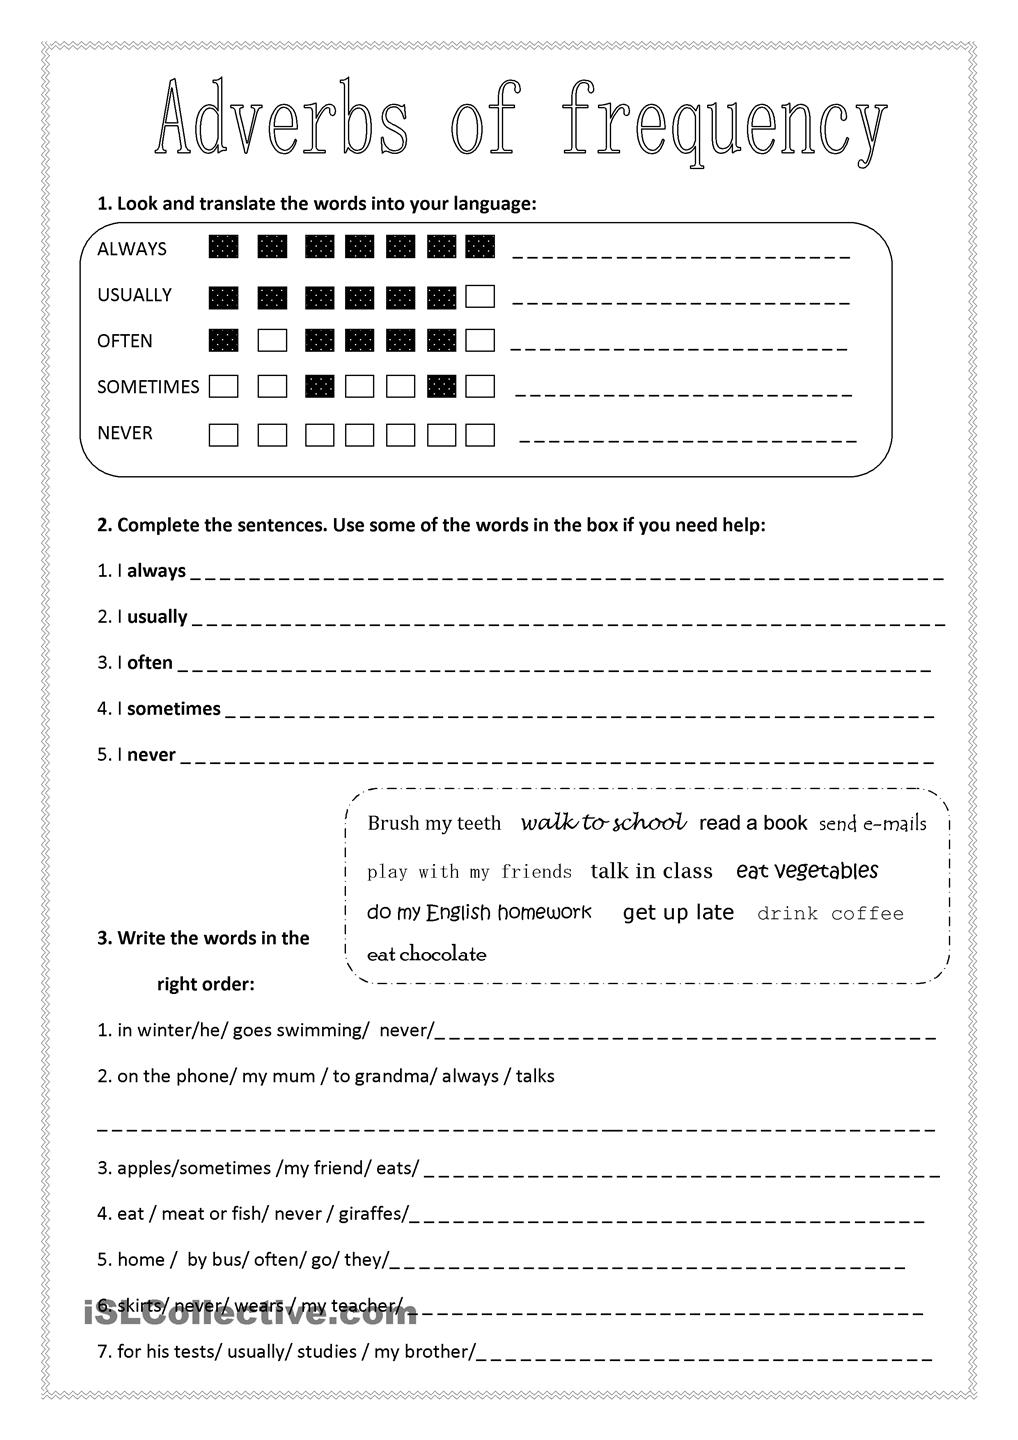 Adverbs Of Frequency Worksheet With Answers Pdf